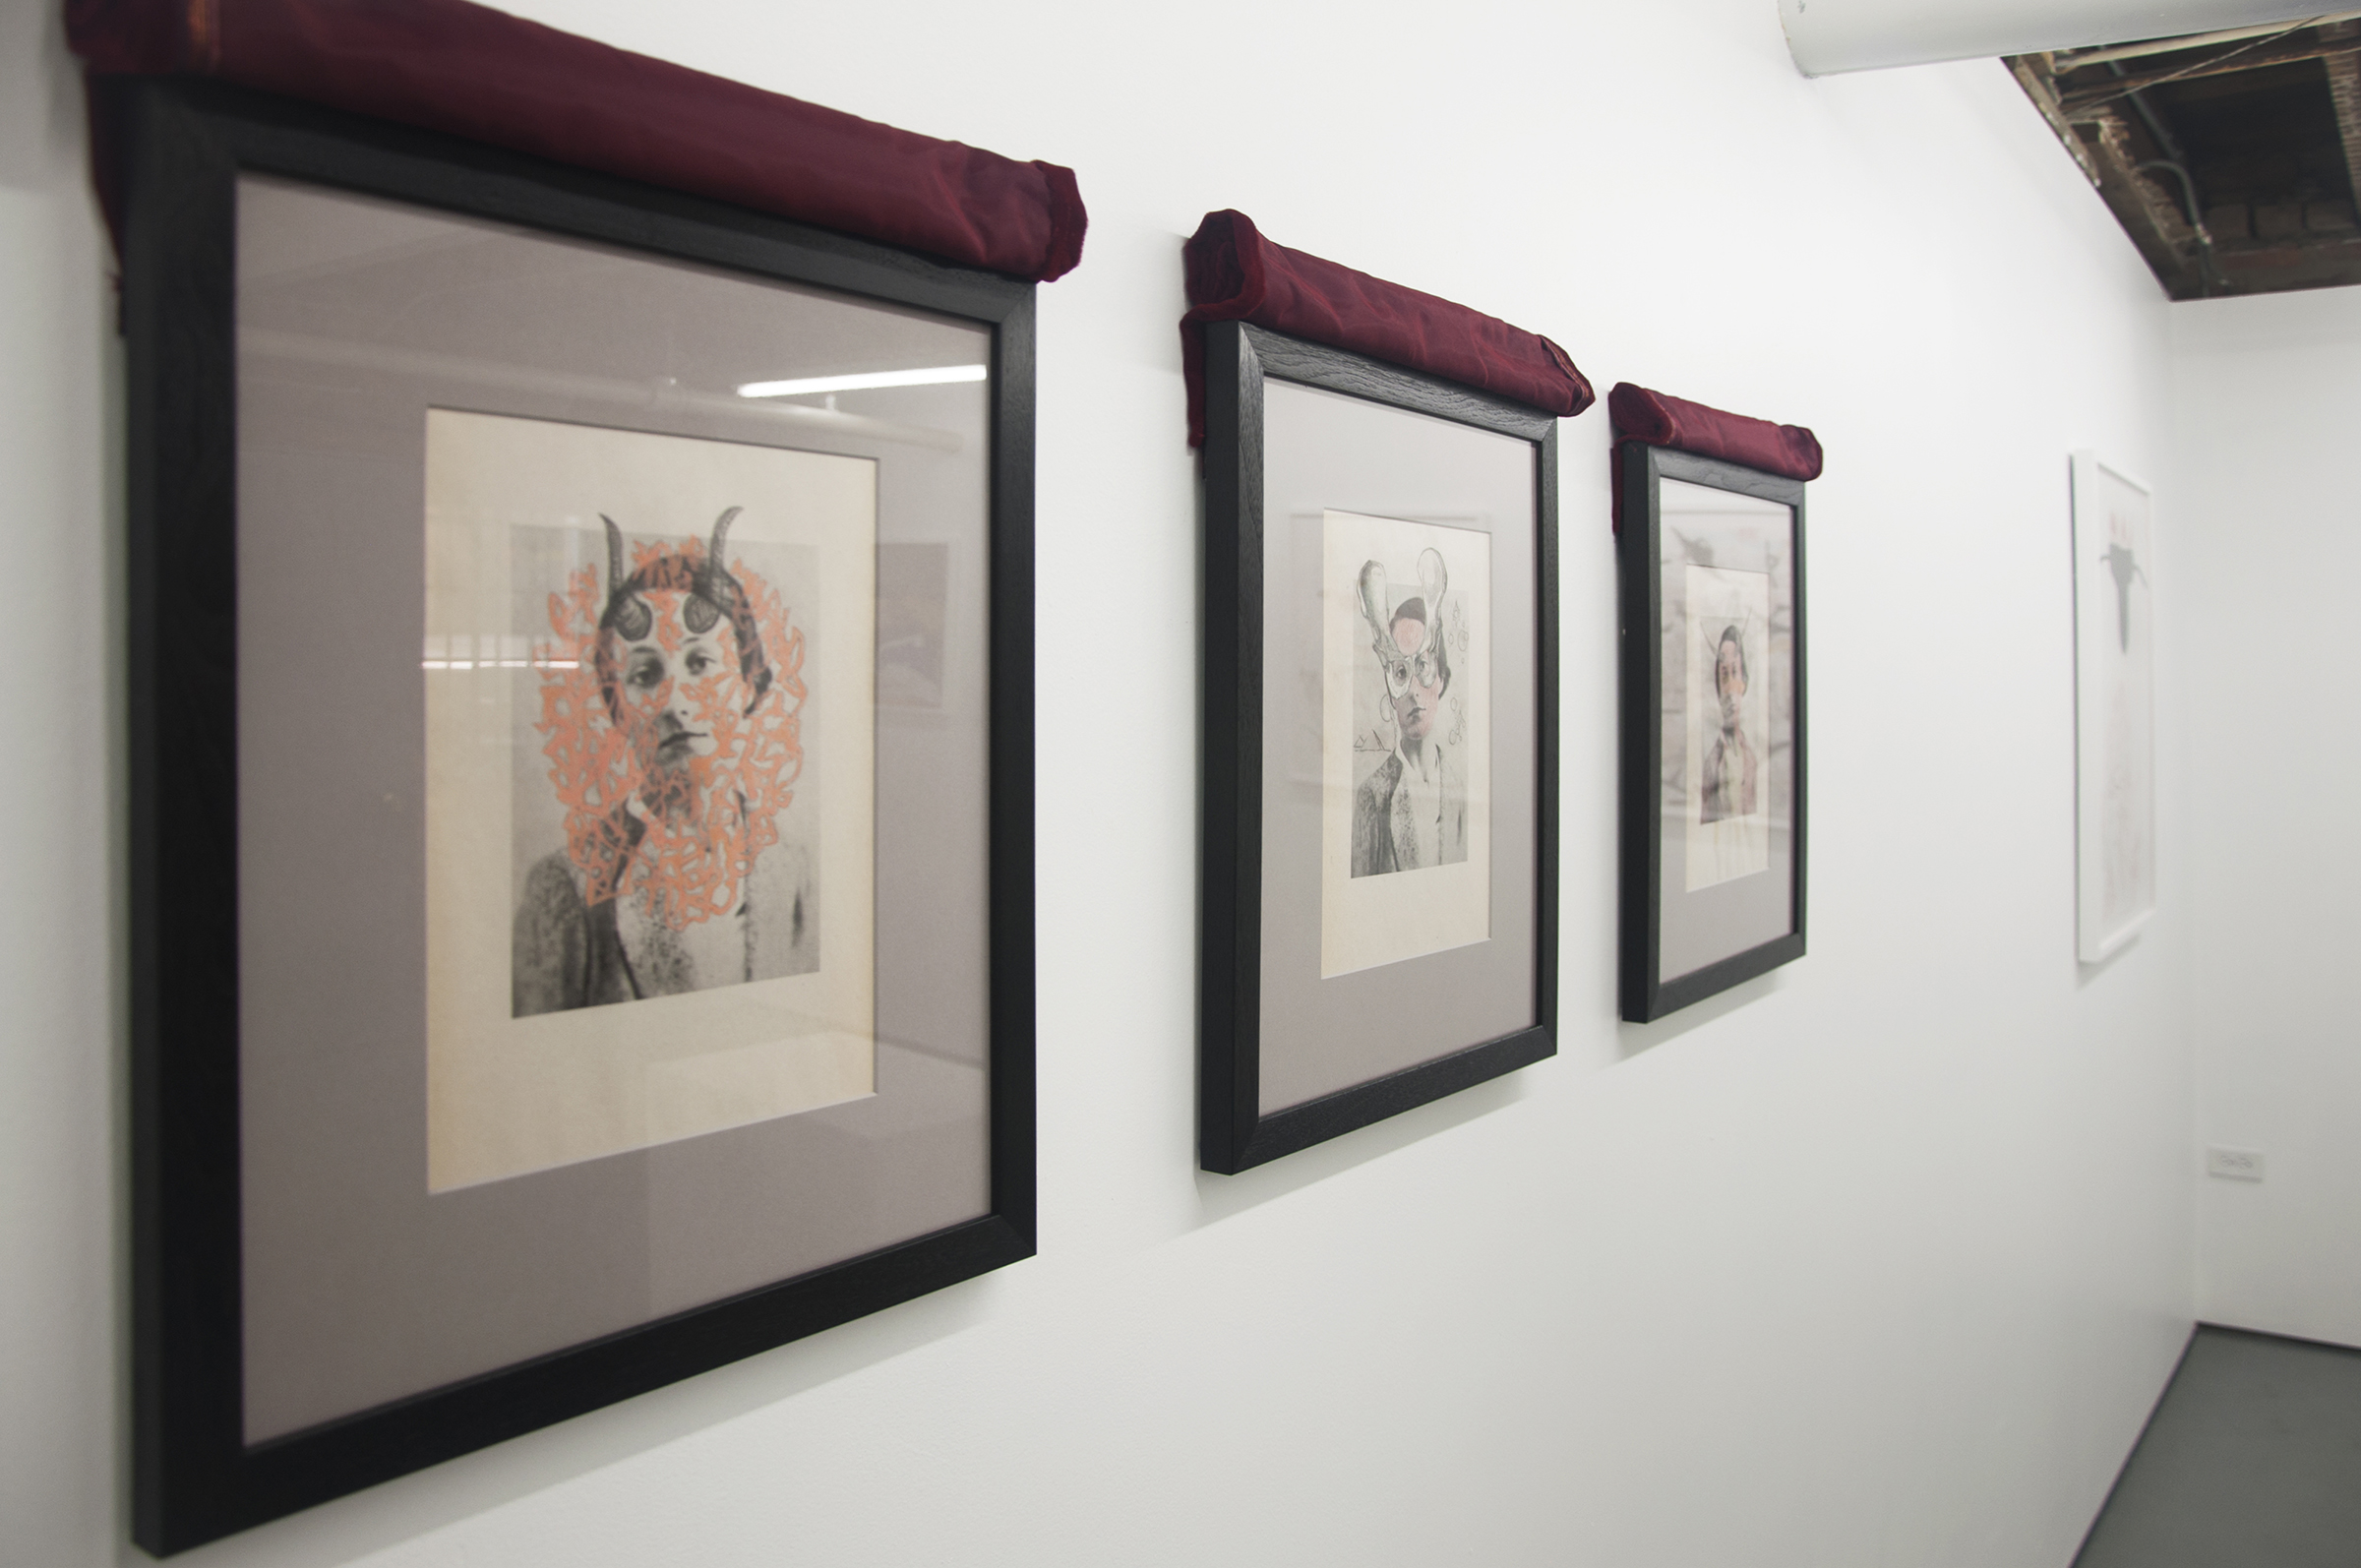 Frontward Tilt (from left to right), Jeremy Biles, “Ariadne's Thread”, 2015, digital print with graphite and wax crayon on newsprint with velvet veil; Jeremy Biles, “The Sensation of Time”, 2015, digital print with graphite, colored pencil, and collage on newsprint with velvet veil; Jeremy Biles, 2015, “Mirror of Tauromachy”, digital print with graphite, colored pencil, and semen on newsprint with velvet veil.